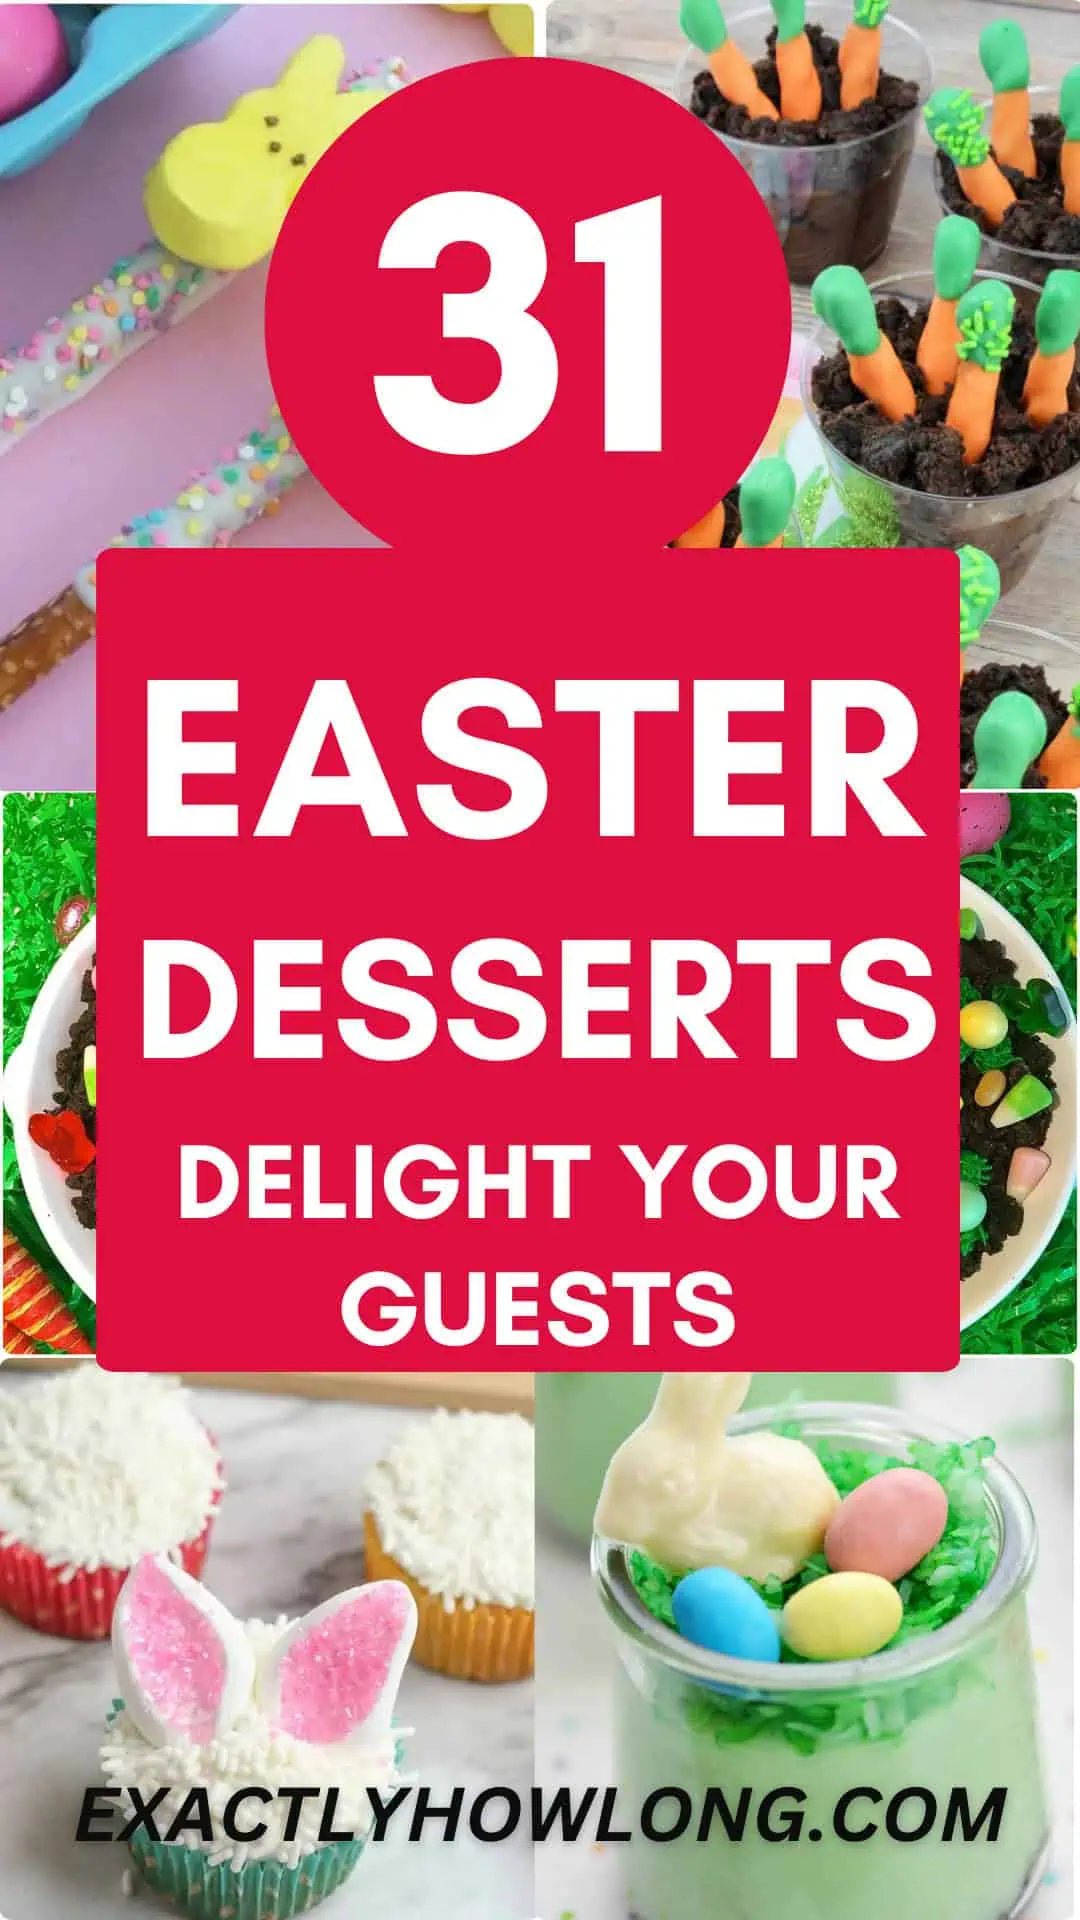 31 Easy Easter Desserts Delight Guests